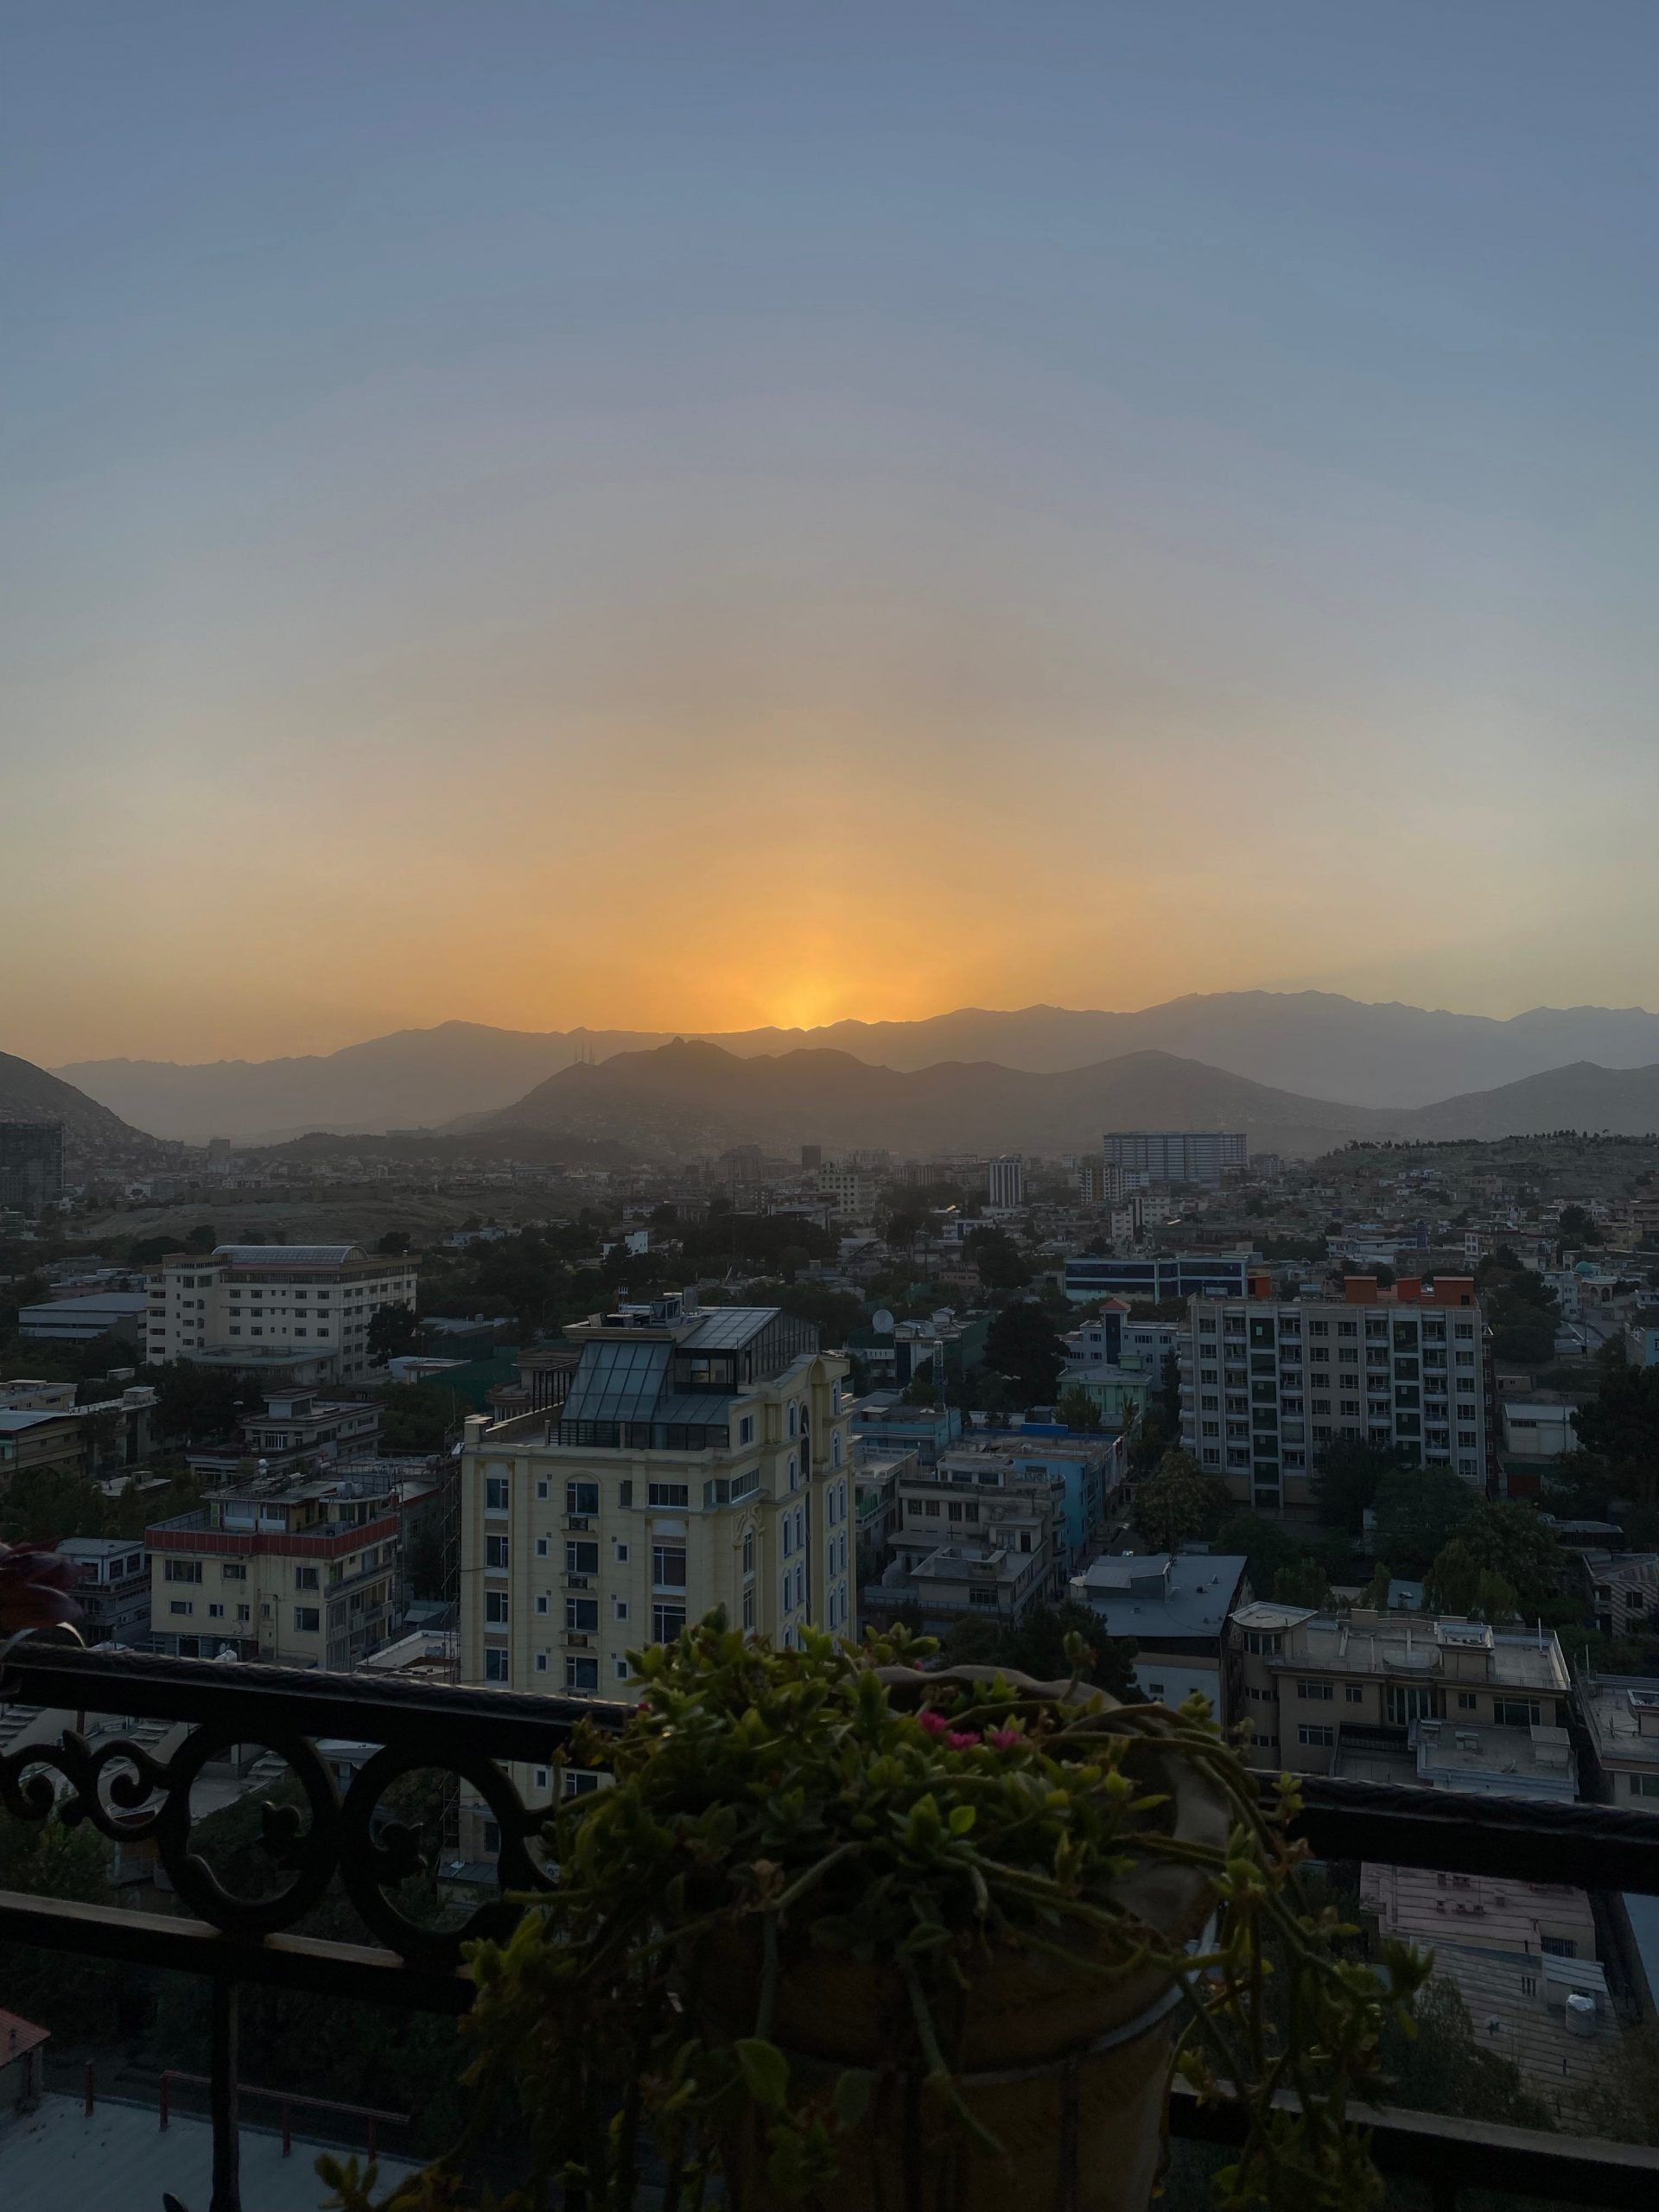 The sun is seen in the distance over the Kabul skyline.